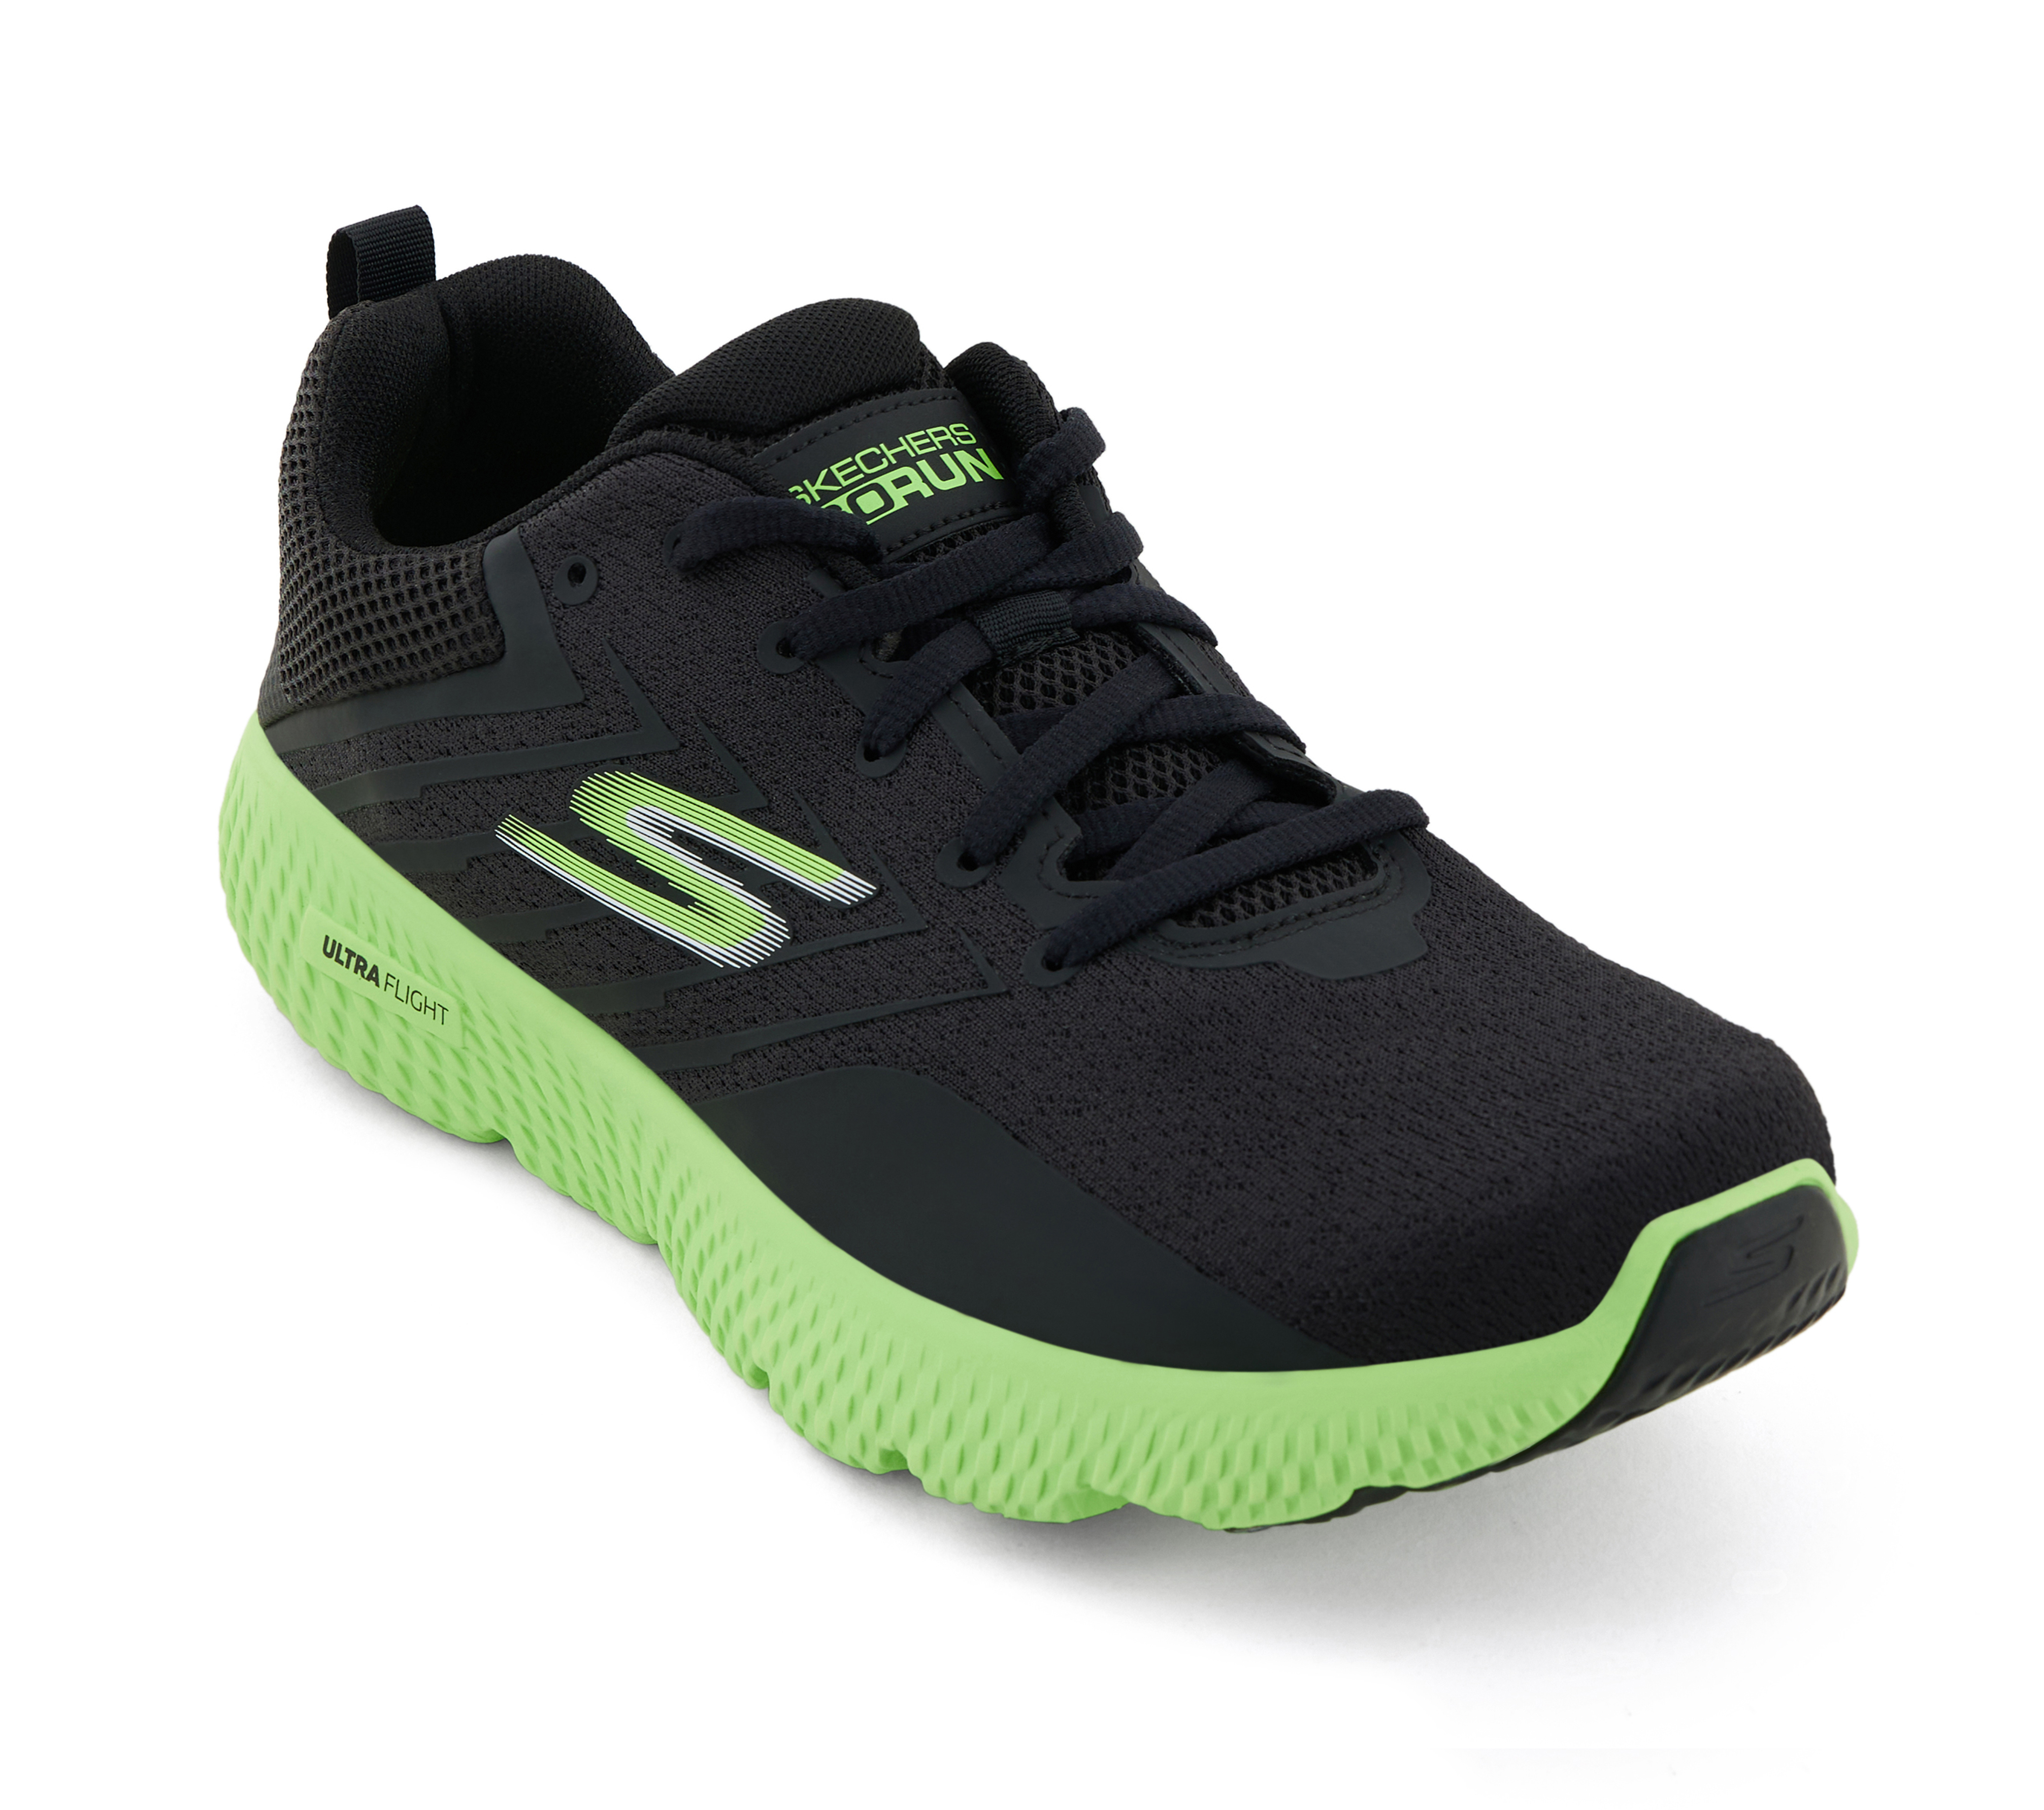 POWER - VOLT, BLACK/LIME Footwear Lateral View